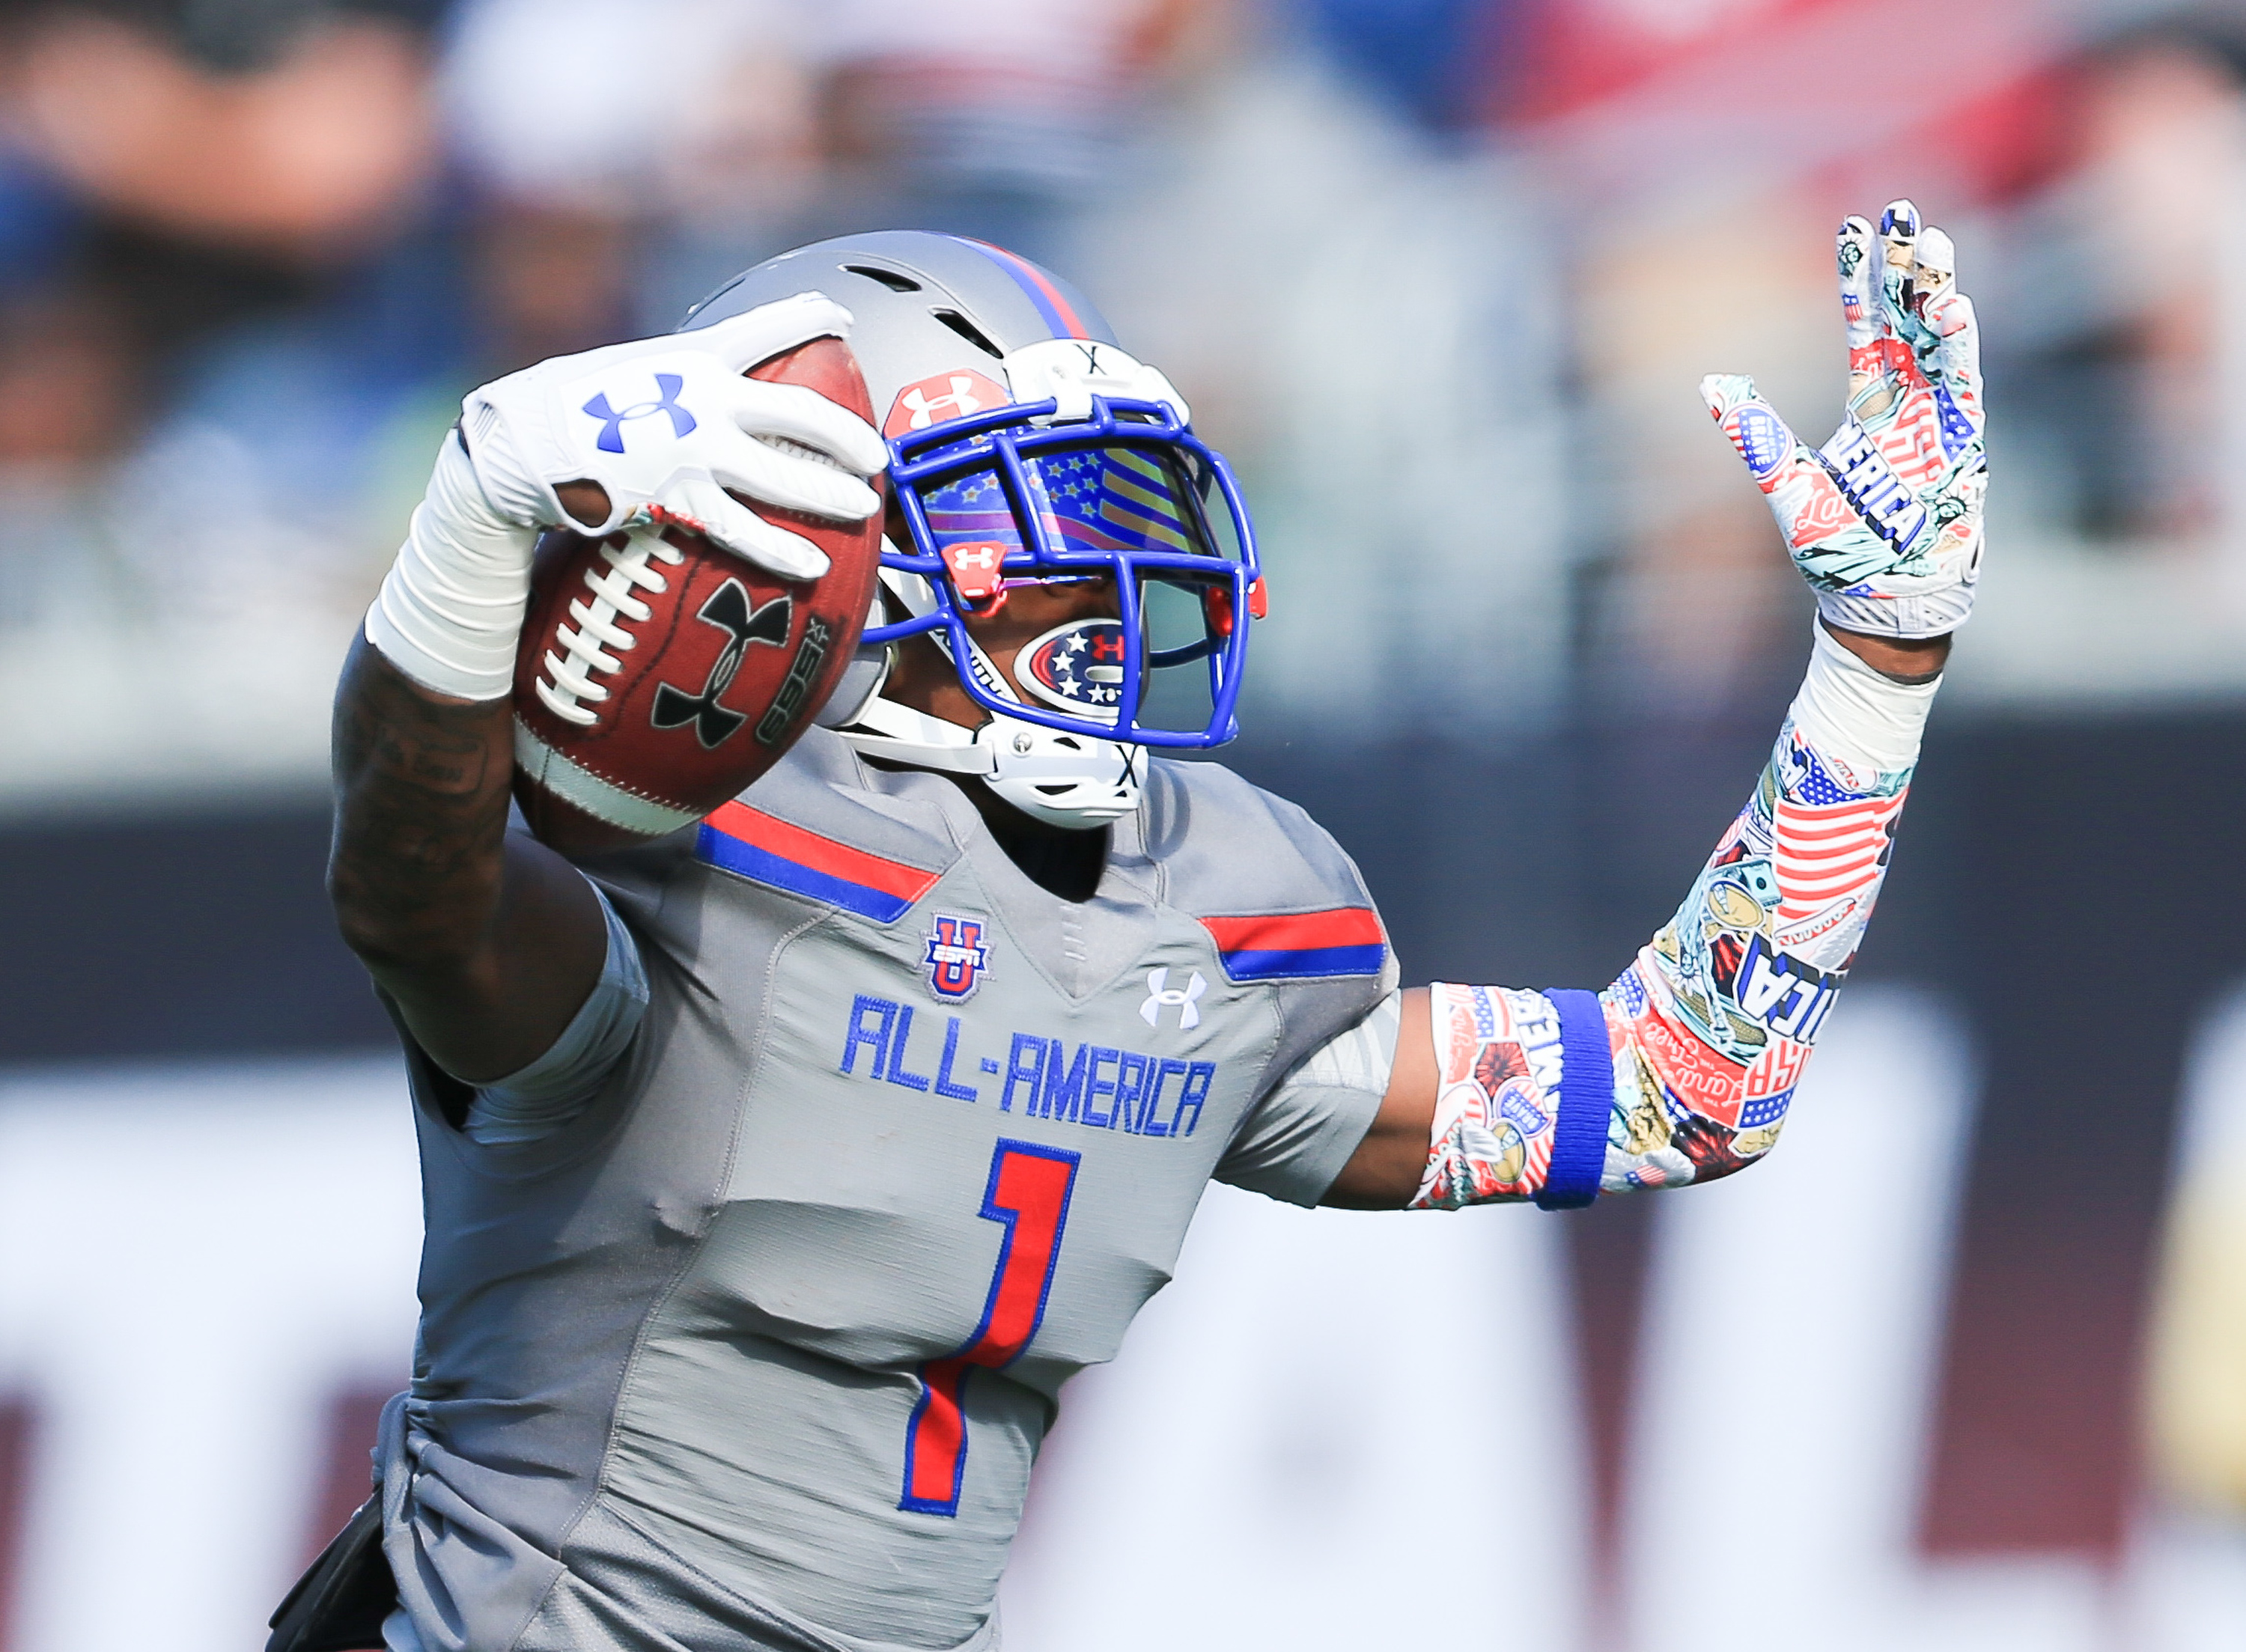 Jeff Thomas leads Team Armour to Under Armour All-America Game win